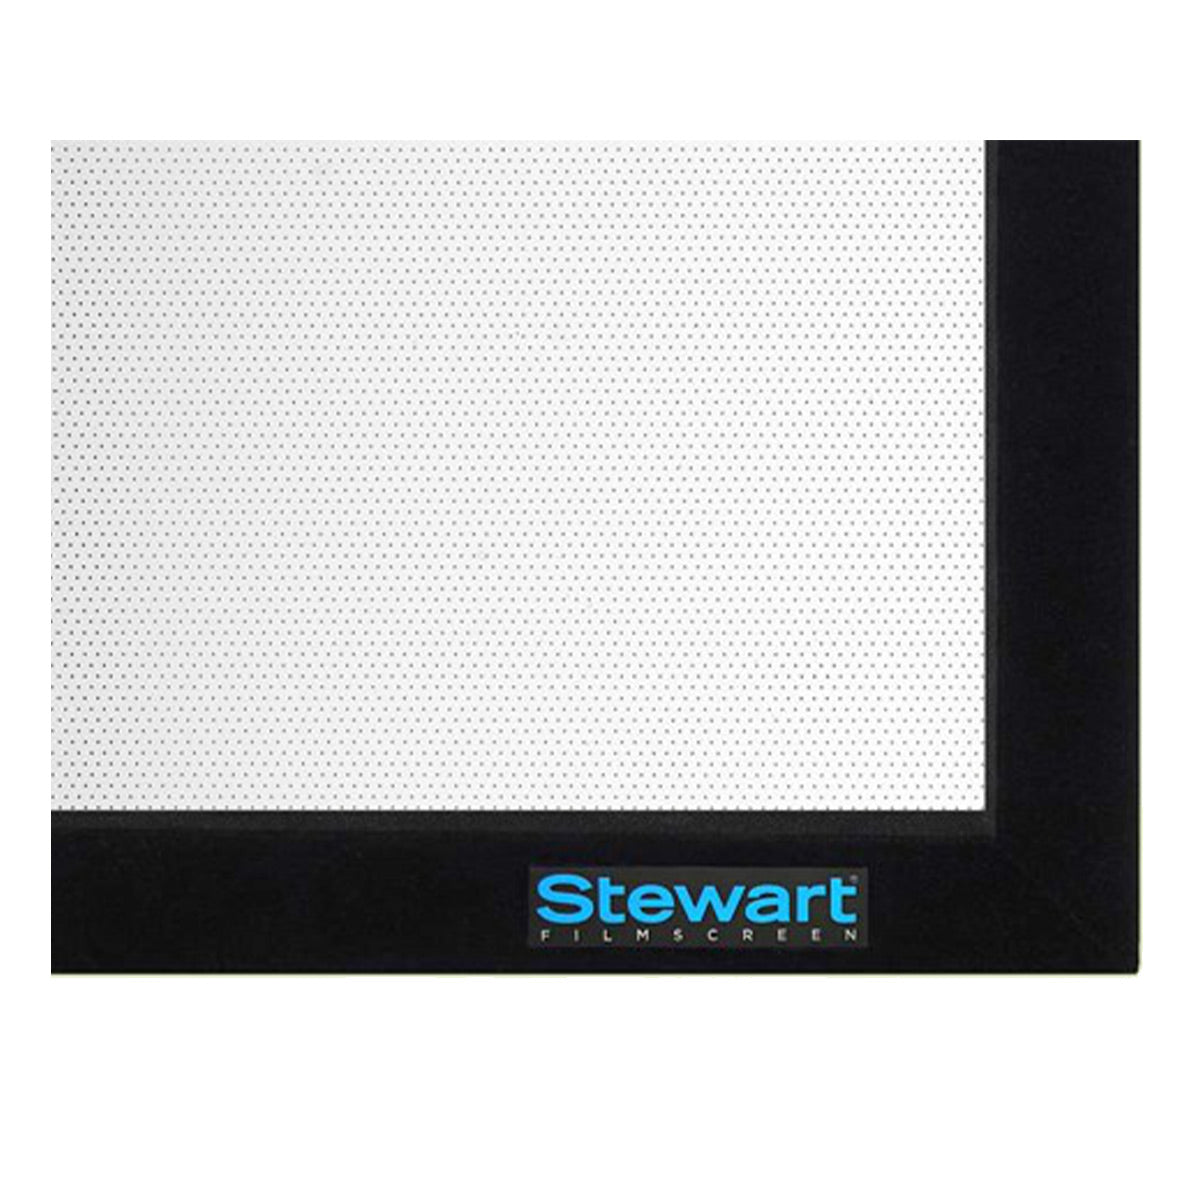 Stewart WallScreen Deluxe 135" HDTV Projector Screen with 3.25" Fixed Frame, 1.3 Peak Gain Material, Quick Snap System, and EZ Mount Bracket (StudioTek 130 G4)